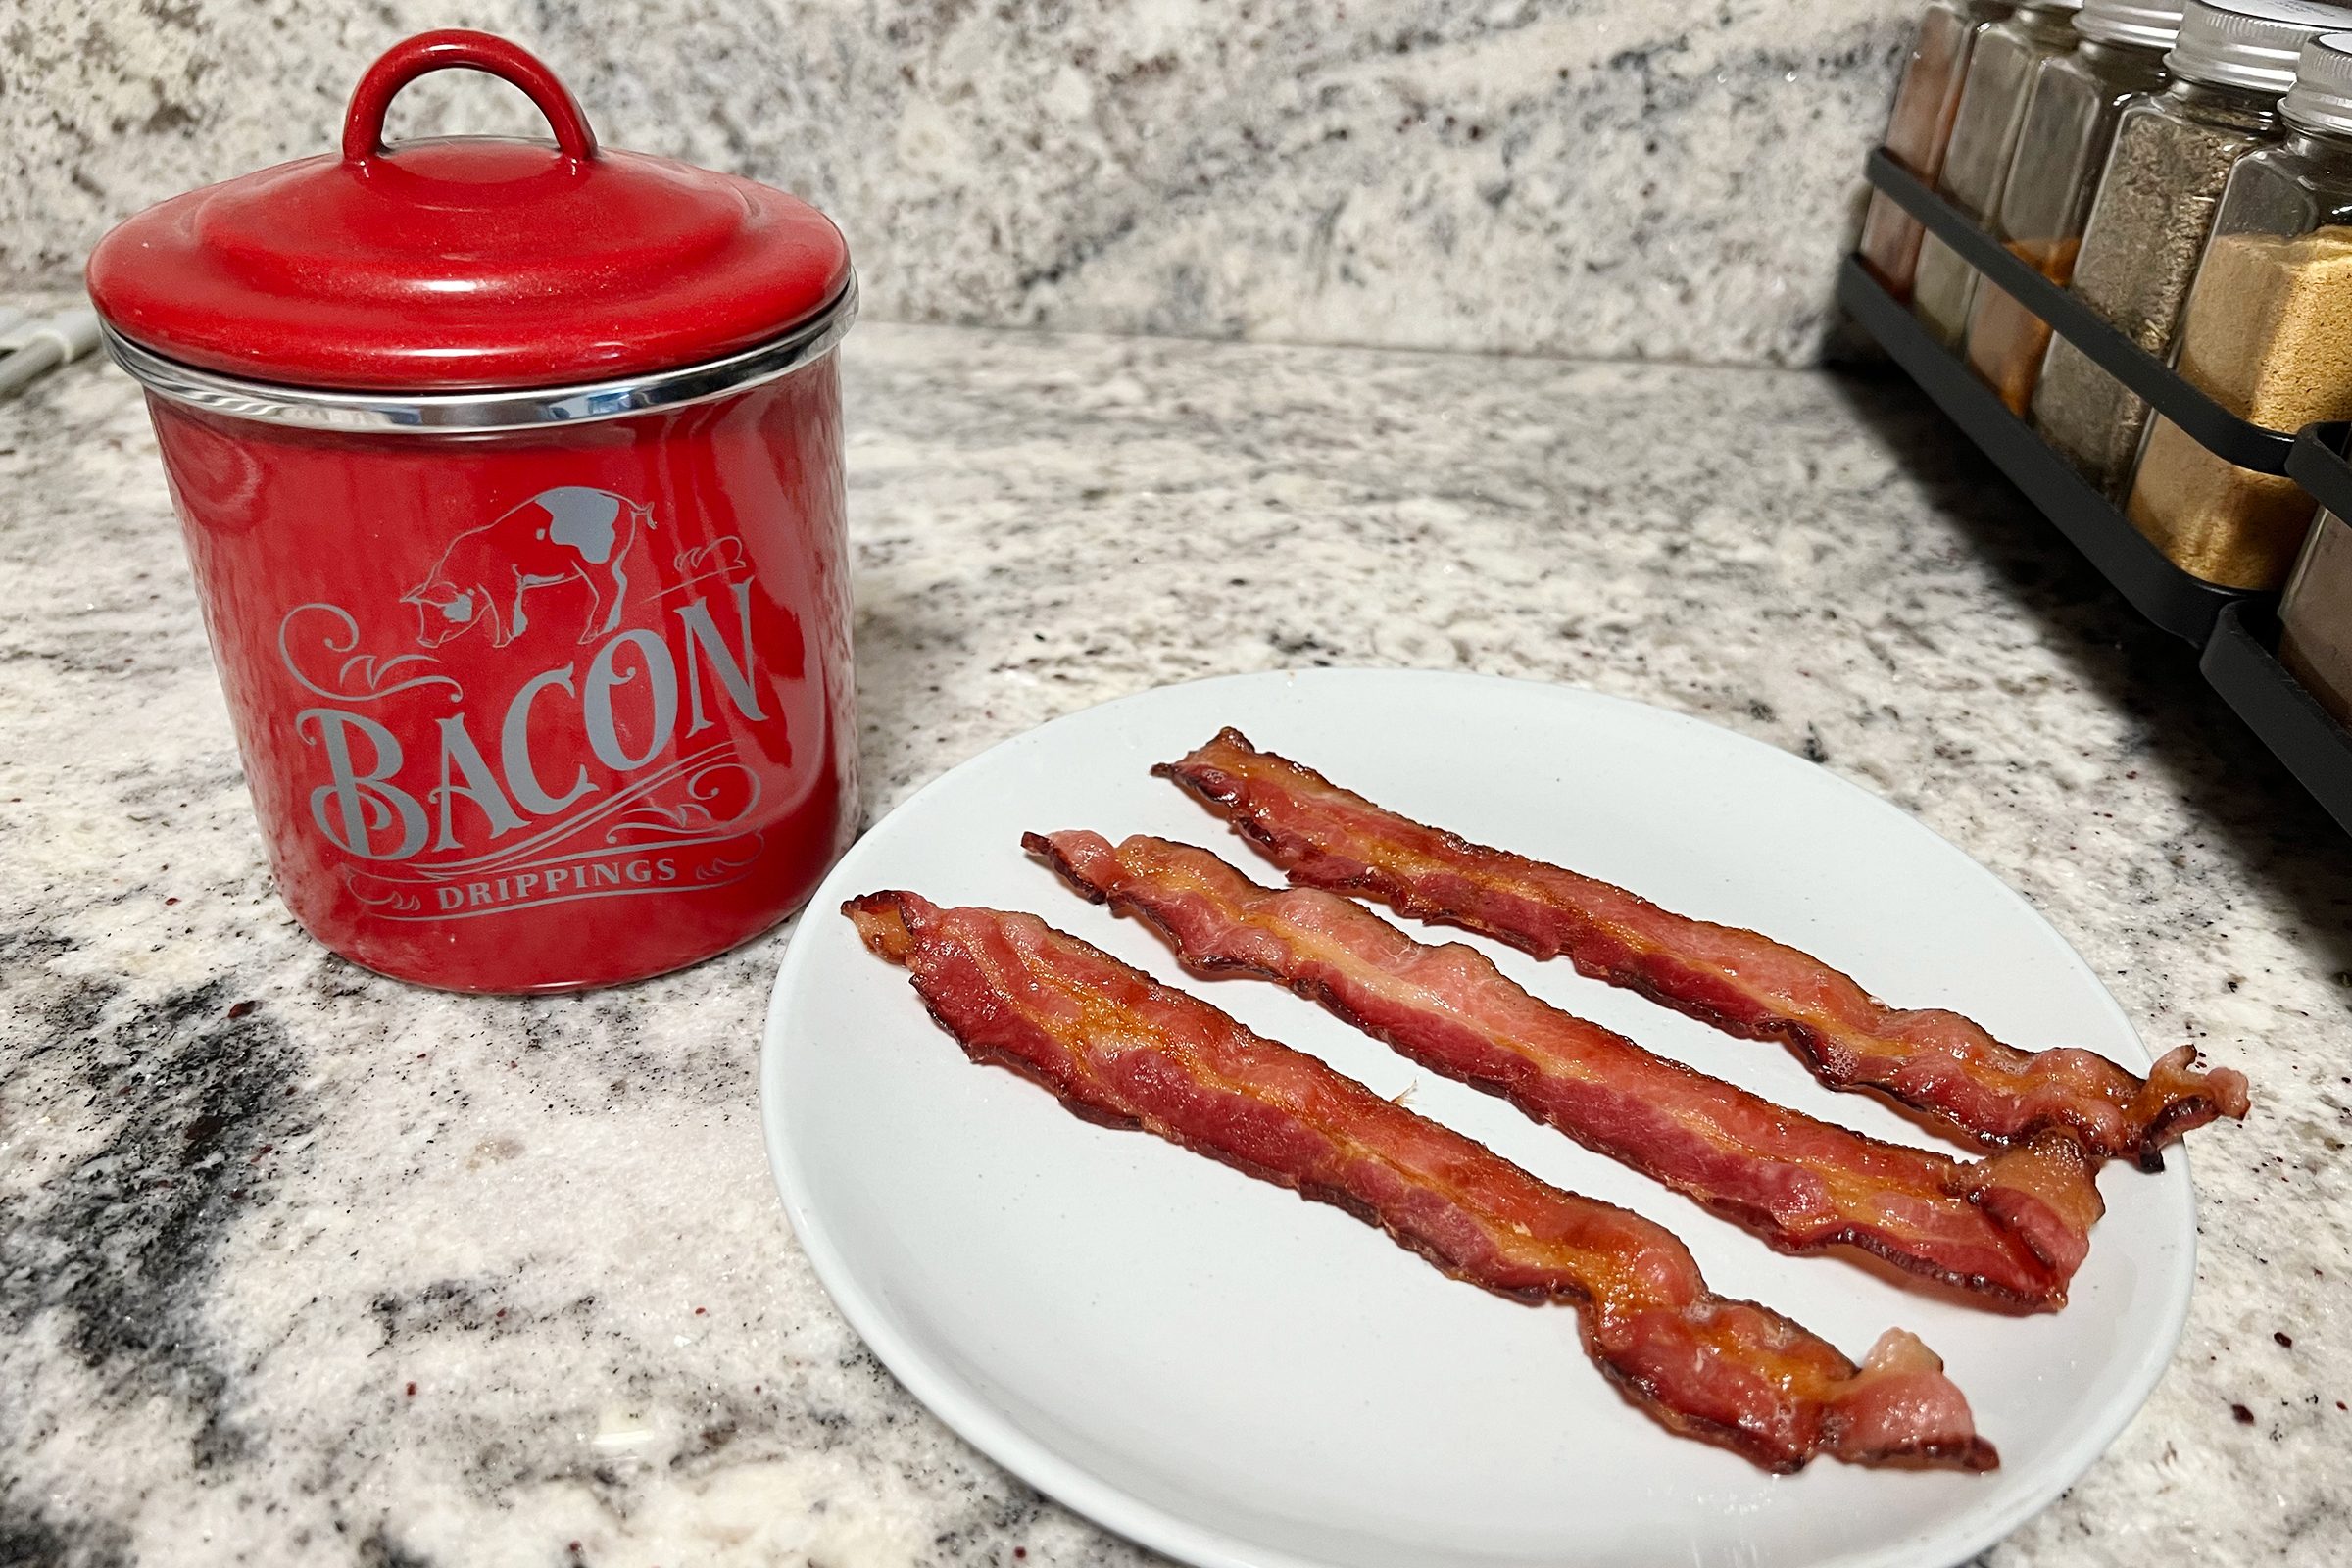 https://www.tasteofhome.com/wp-content/uploads/2021/12/IMG_036829-bacon-grease-container.jpg?fit=680%2C454